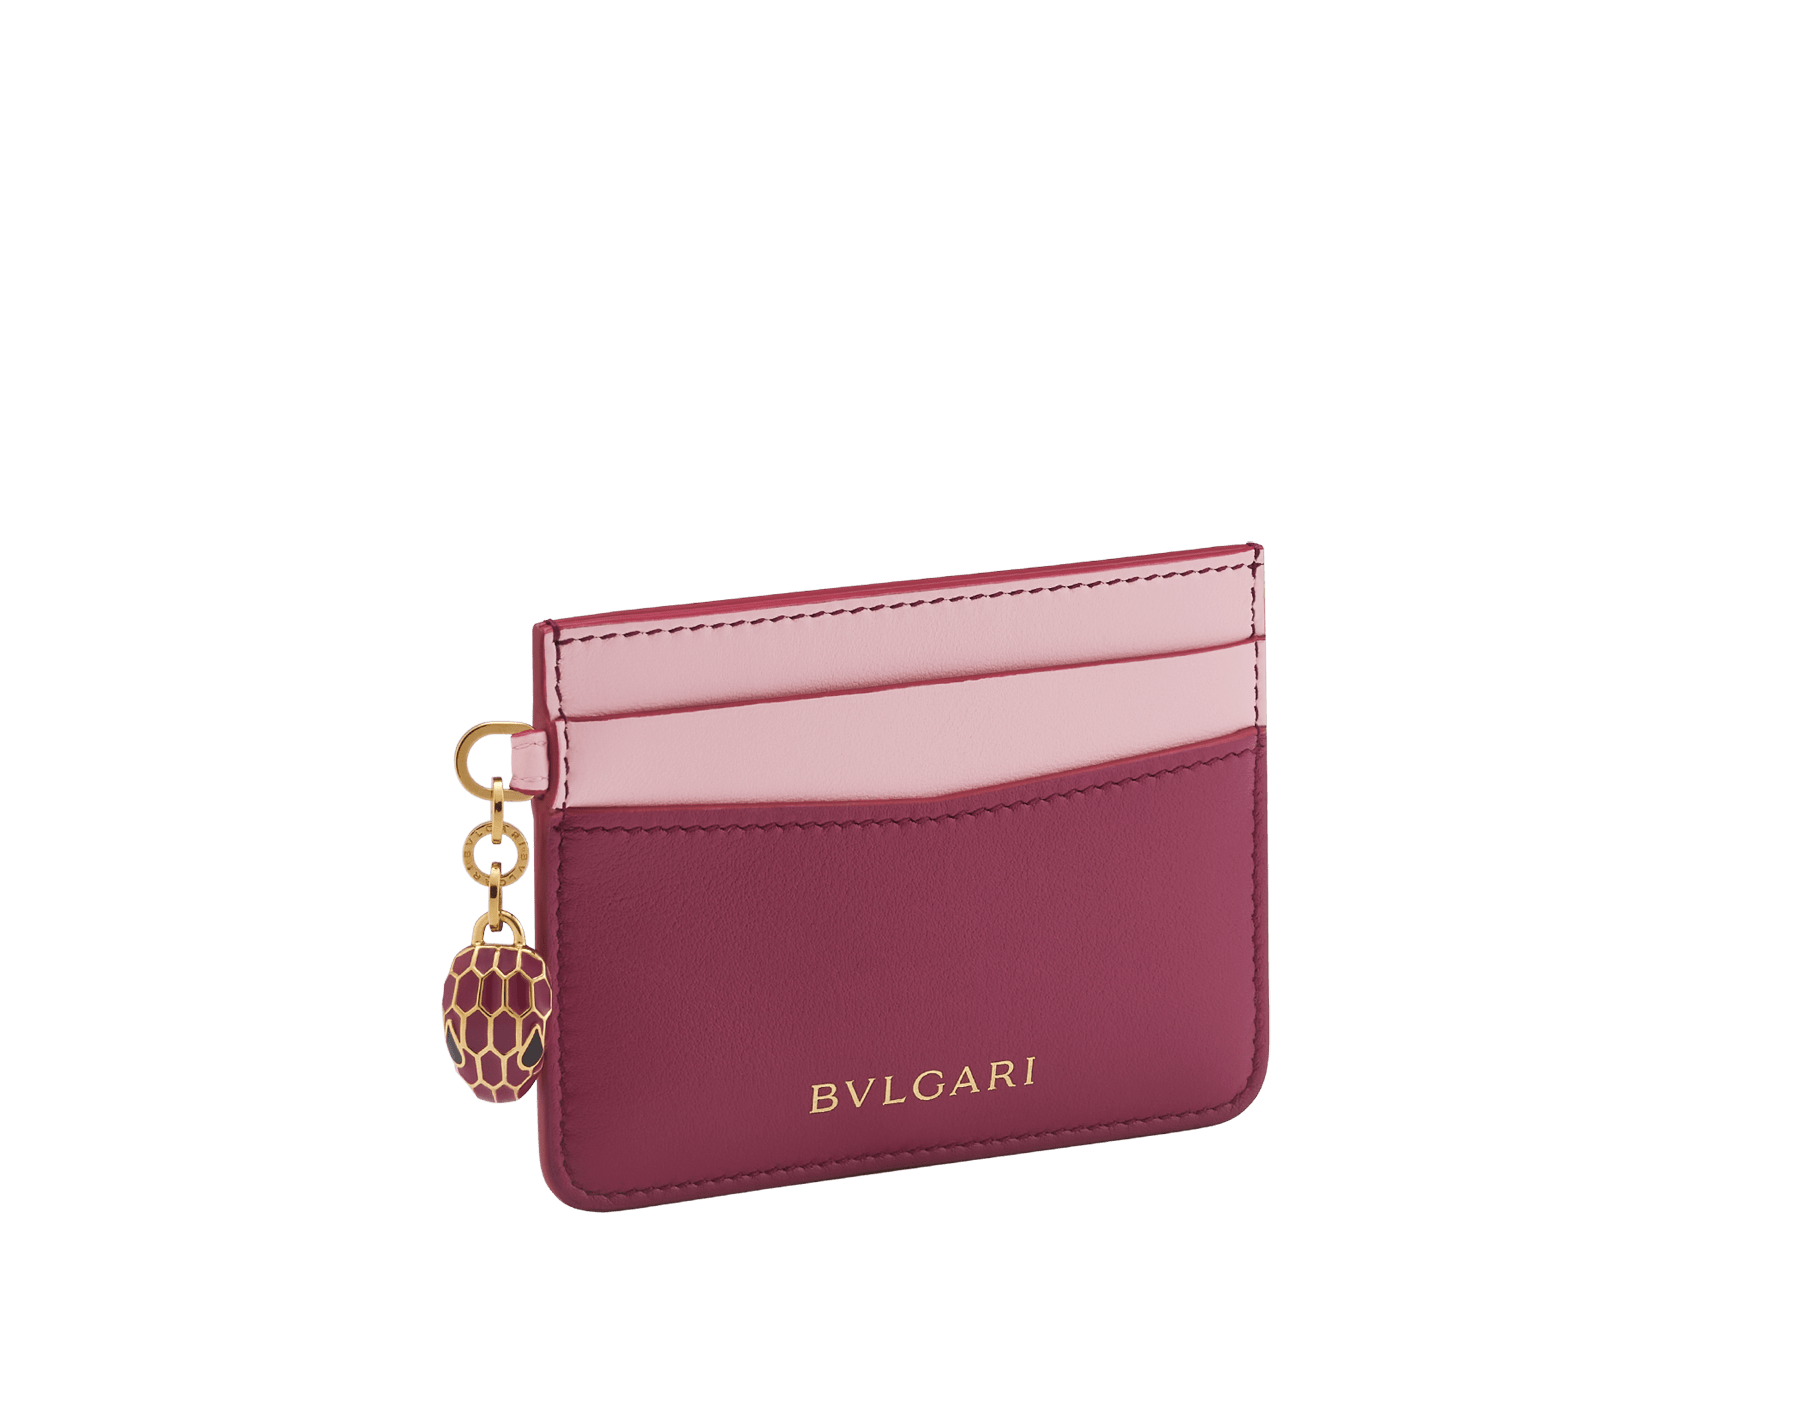 Credit card holder in ruby red and desert quartz calf leather. Serpenti charm in black and white enamel with green malachite enamel eyes and Bulgari logo in metal characters. SEA-CC-HOLDER-CLa image 1